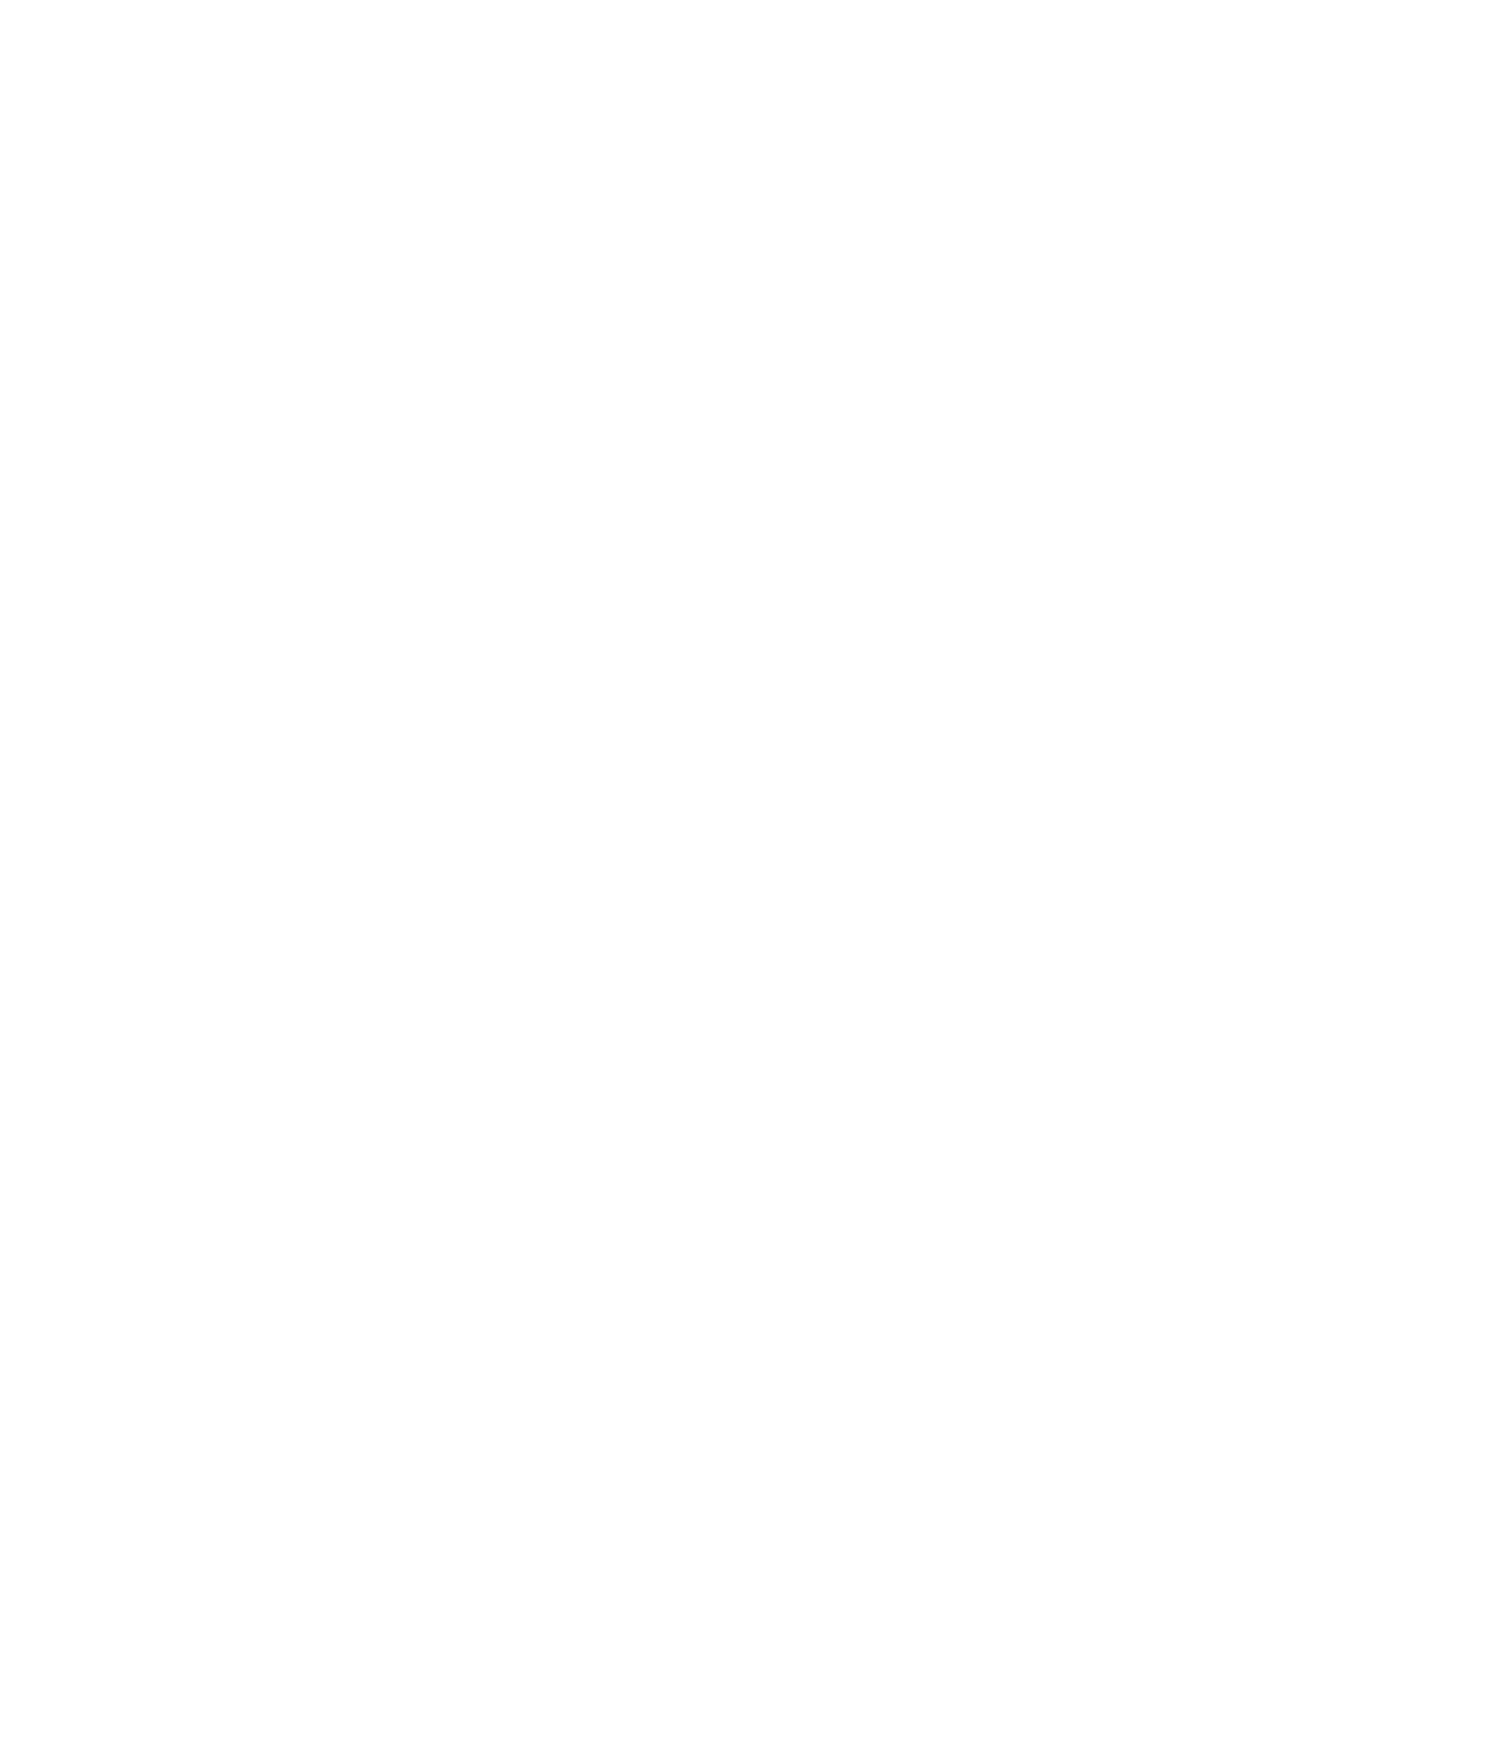 A-SQUARED PRODUCTIONS